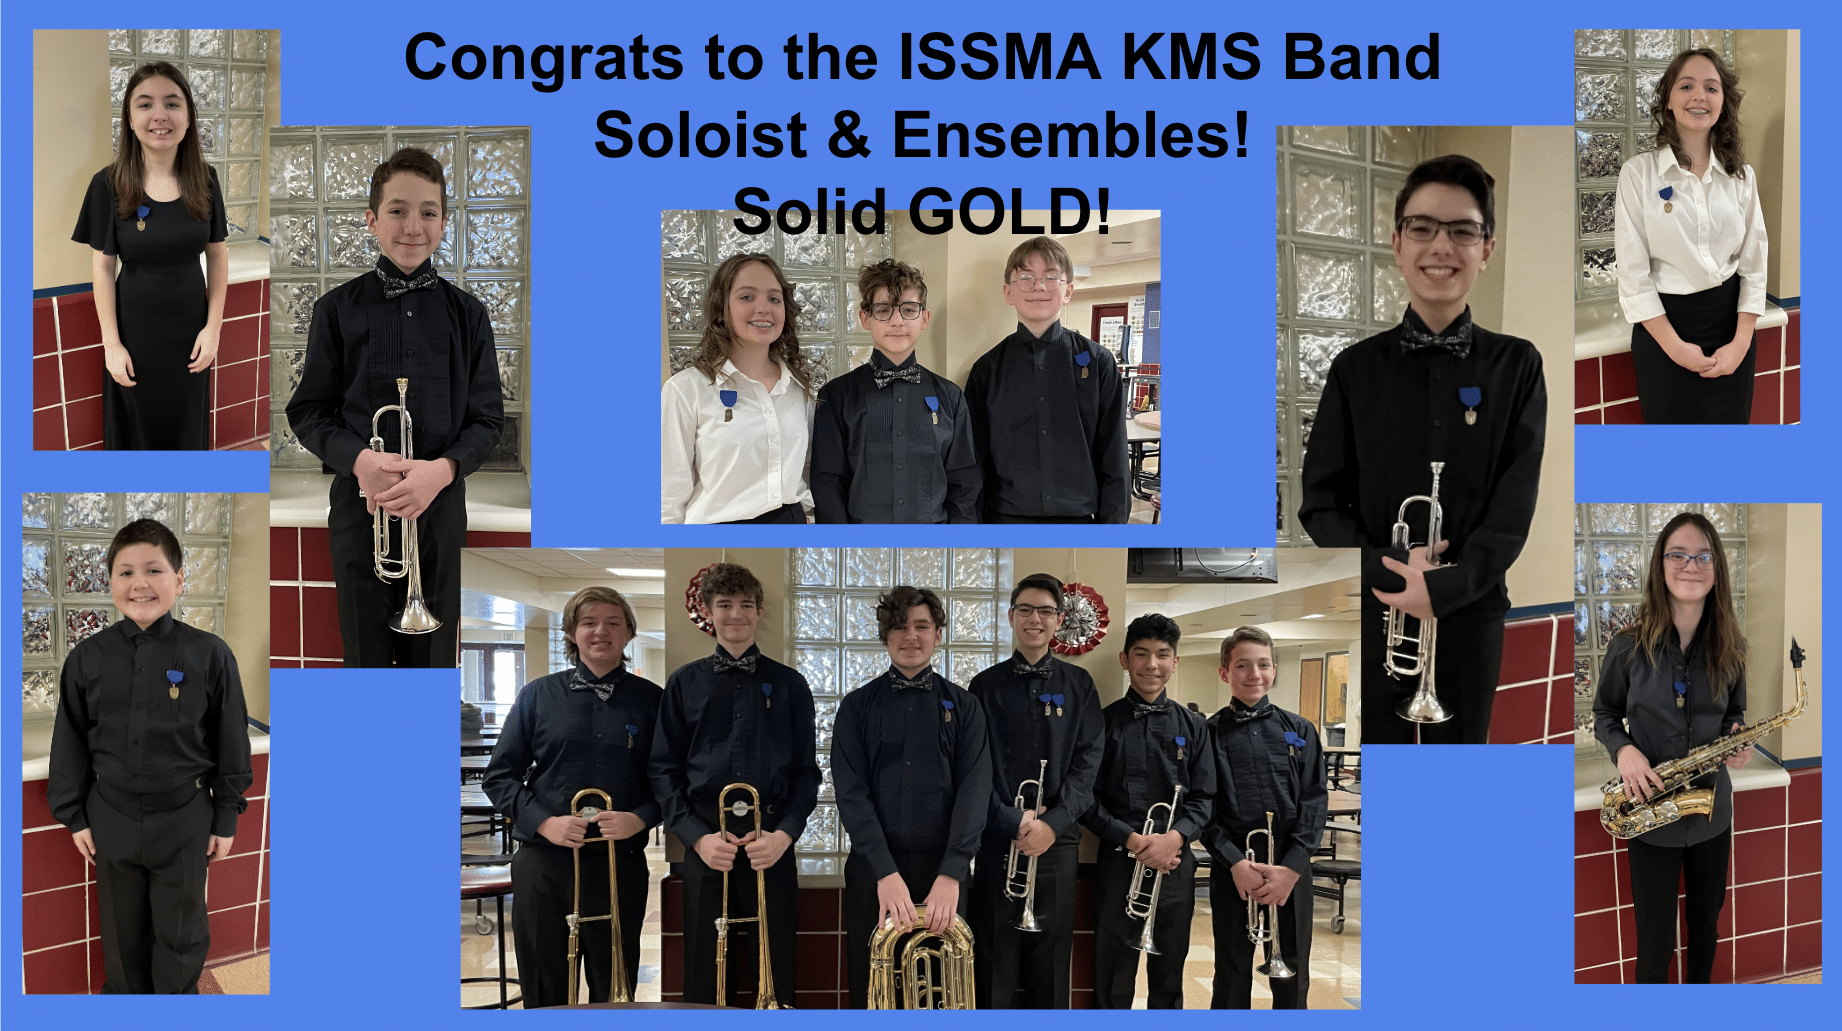 Congrats to the ISSMA KMS Band Soloist & Ensembles! Solid gold!